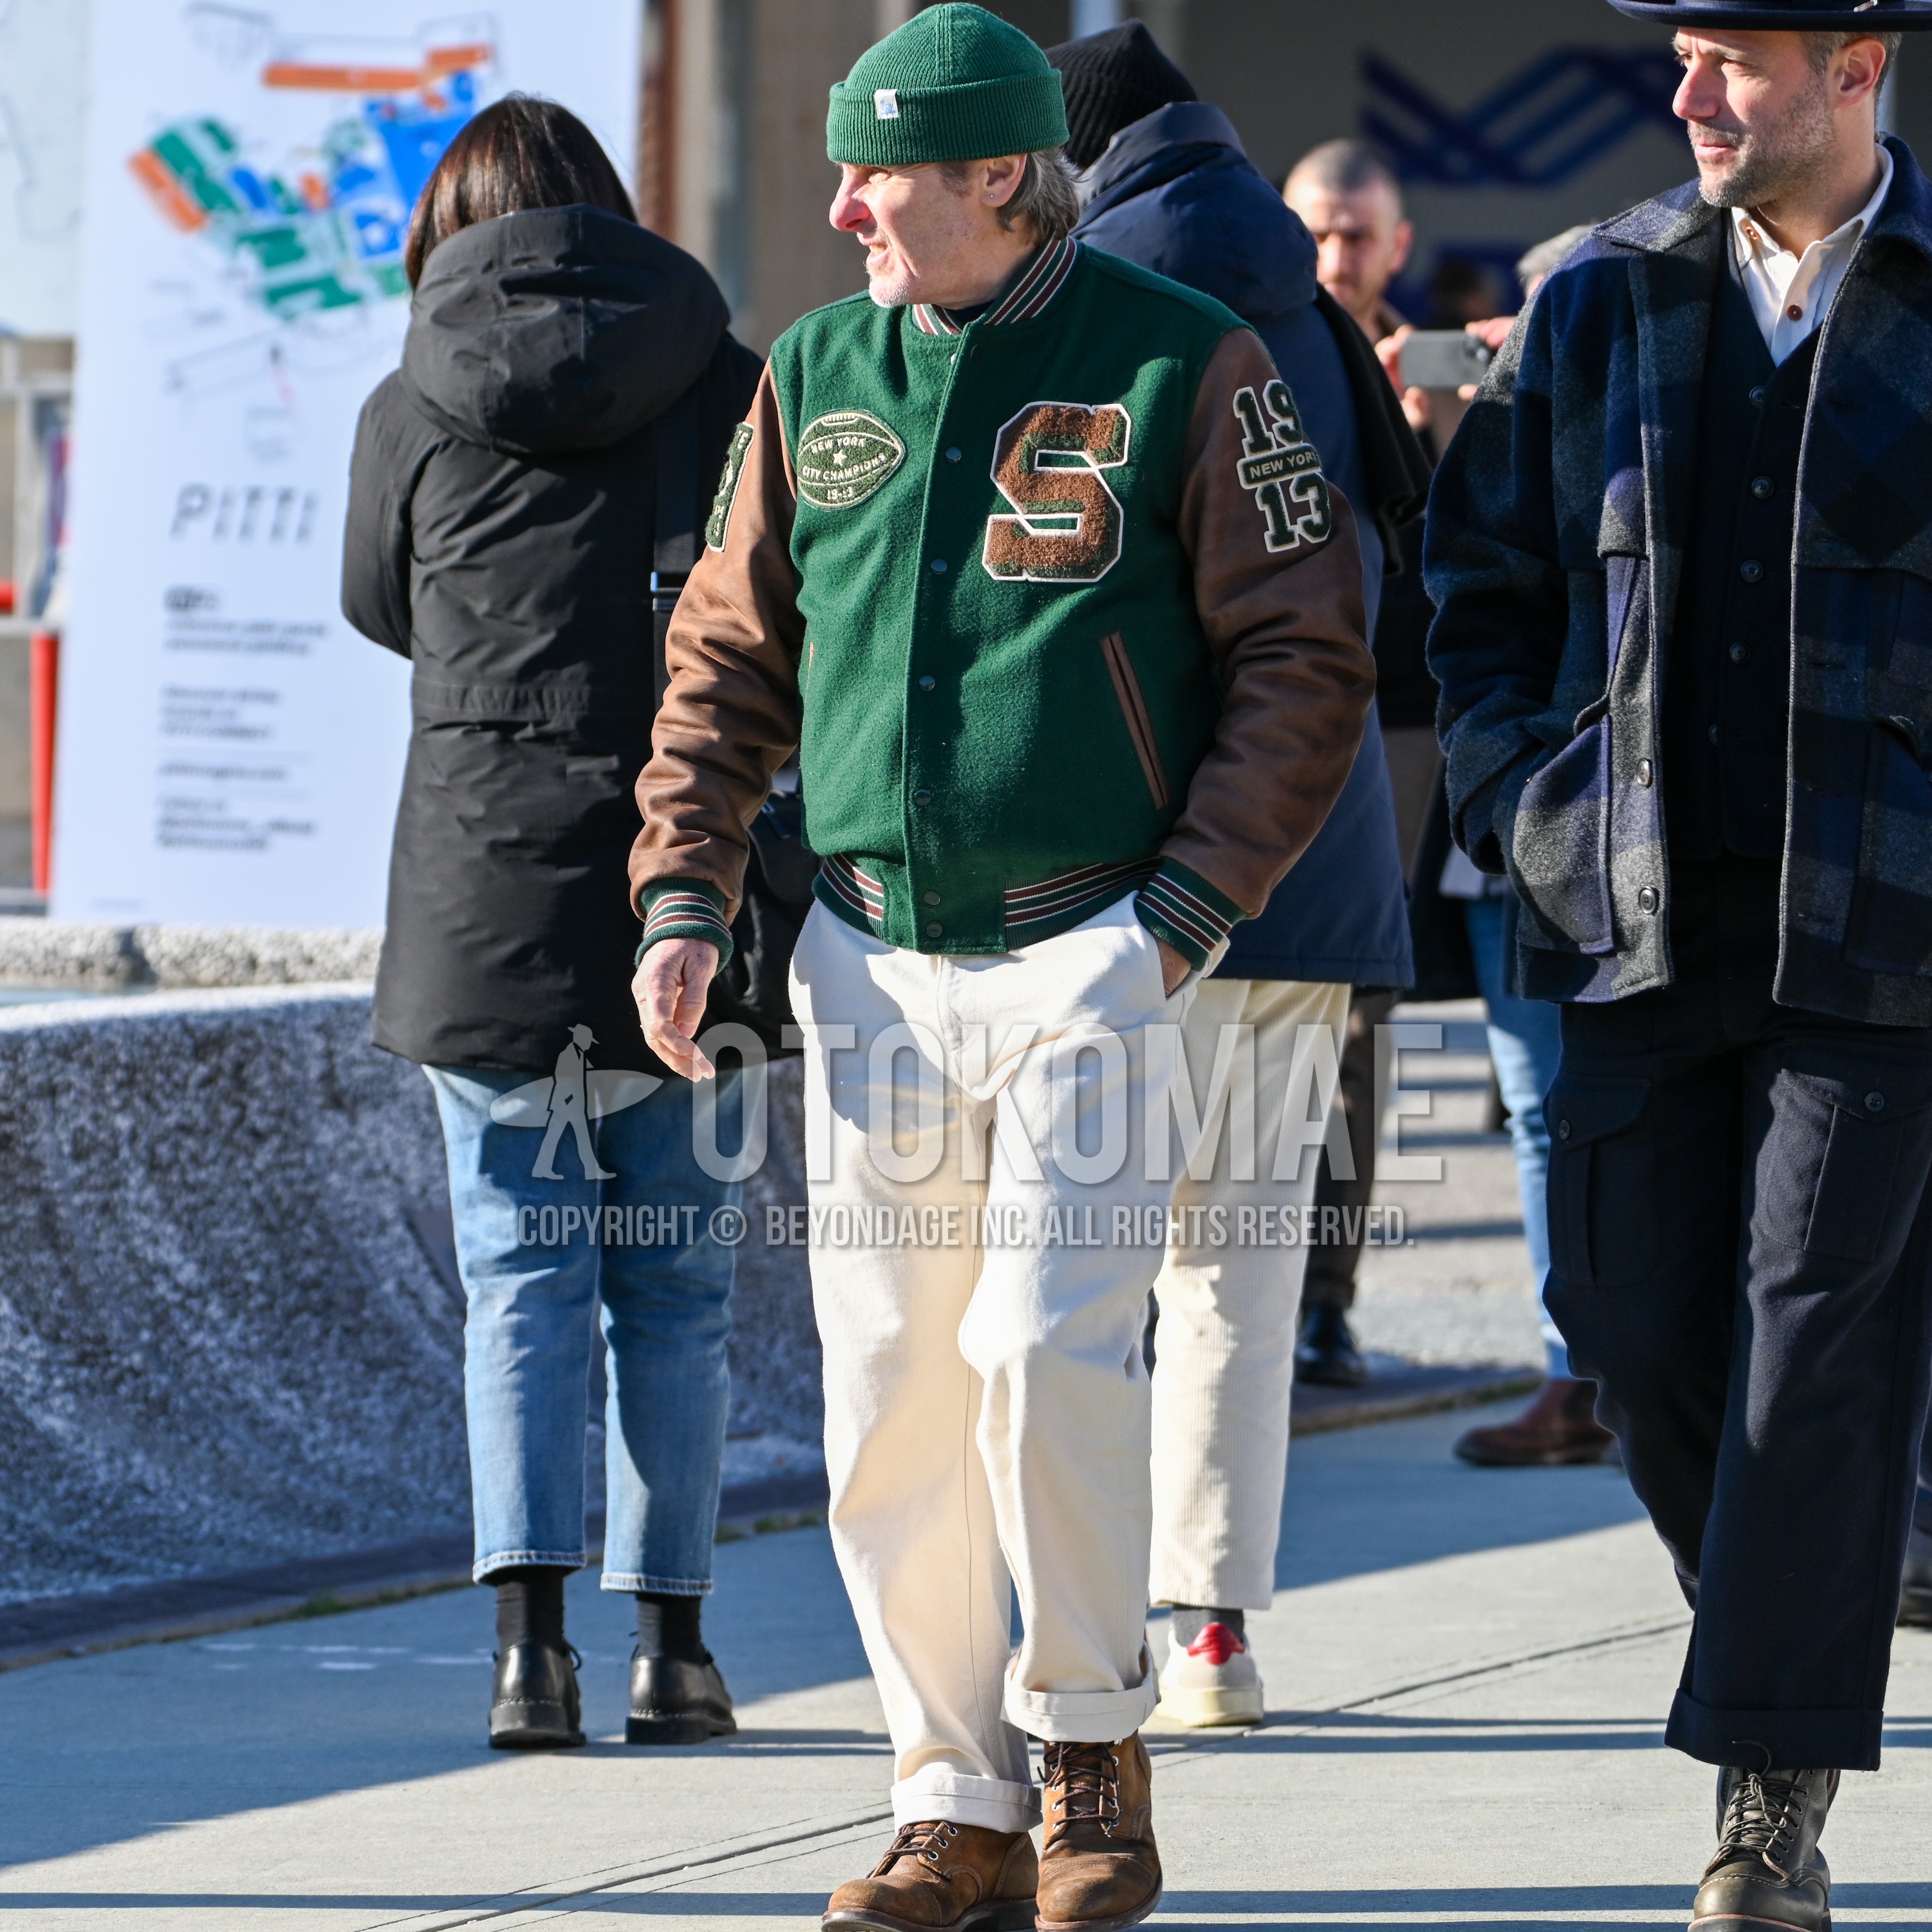 Men's autumn winter outfit with green one point knit cap, green brown deca logo stadium jacket, white plain cotton pants, brown work boots.